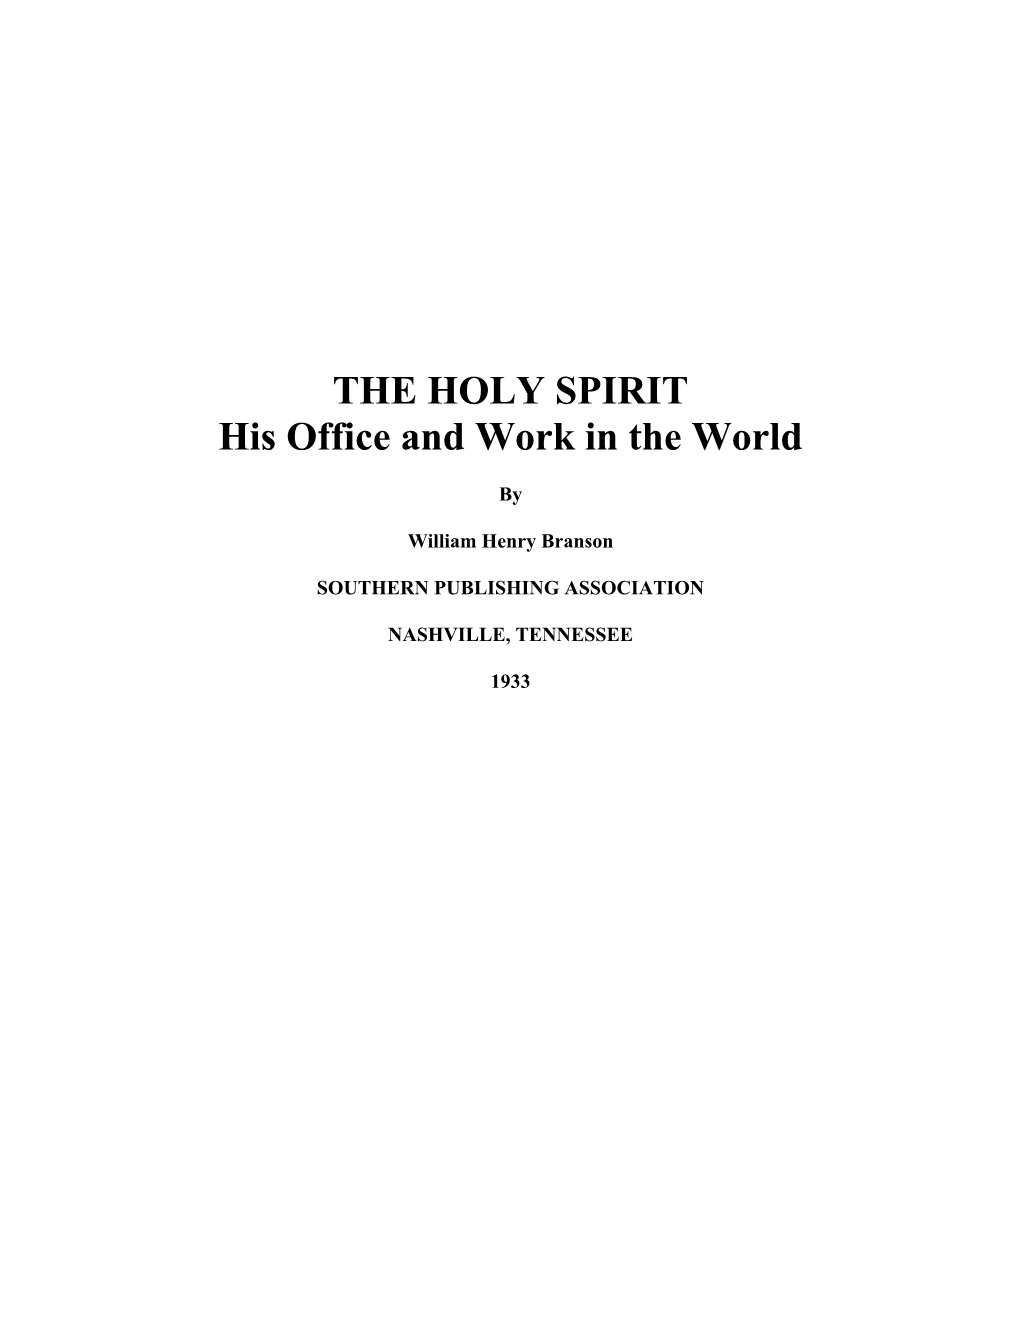 THE HOLY SPIRIT His Office and Work in the World